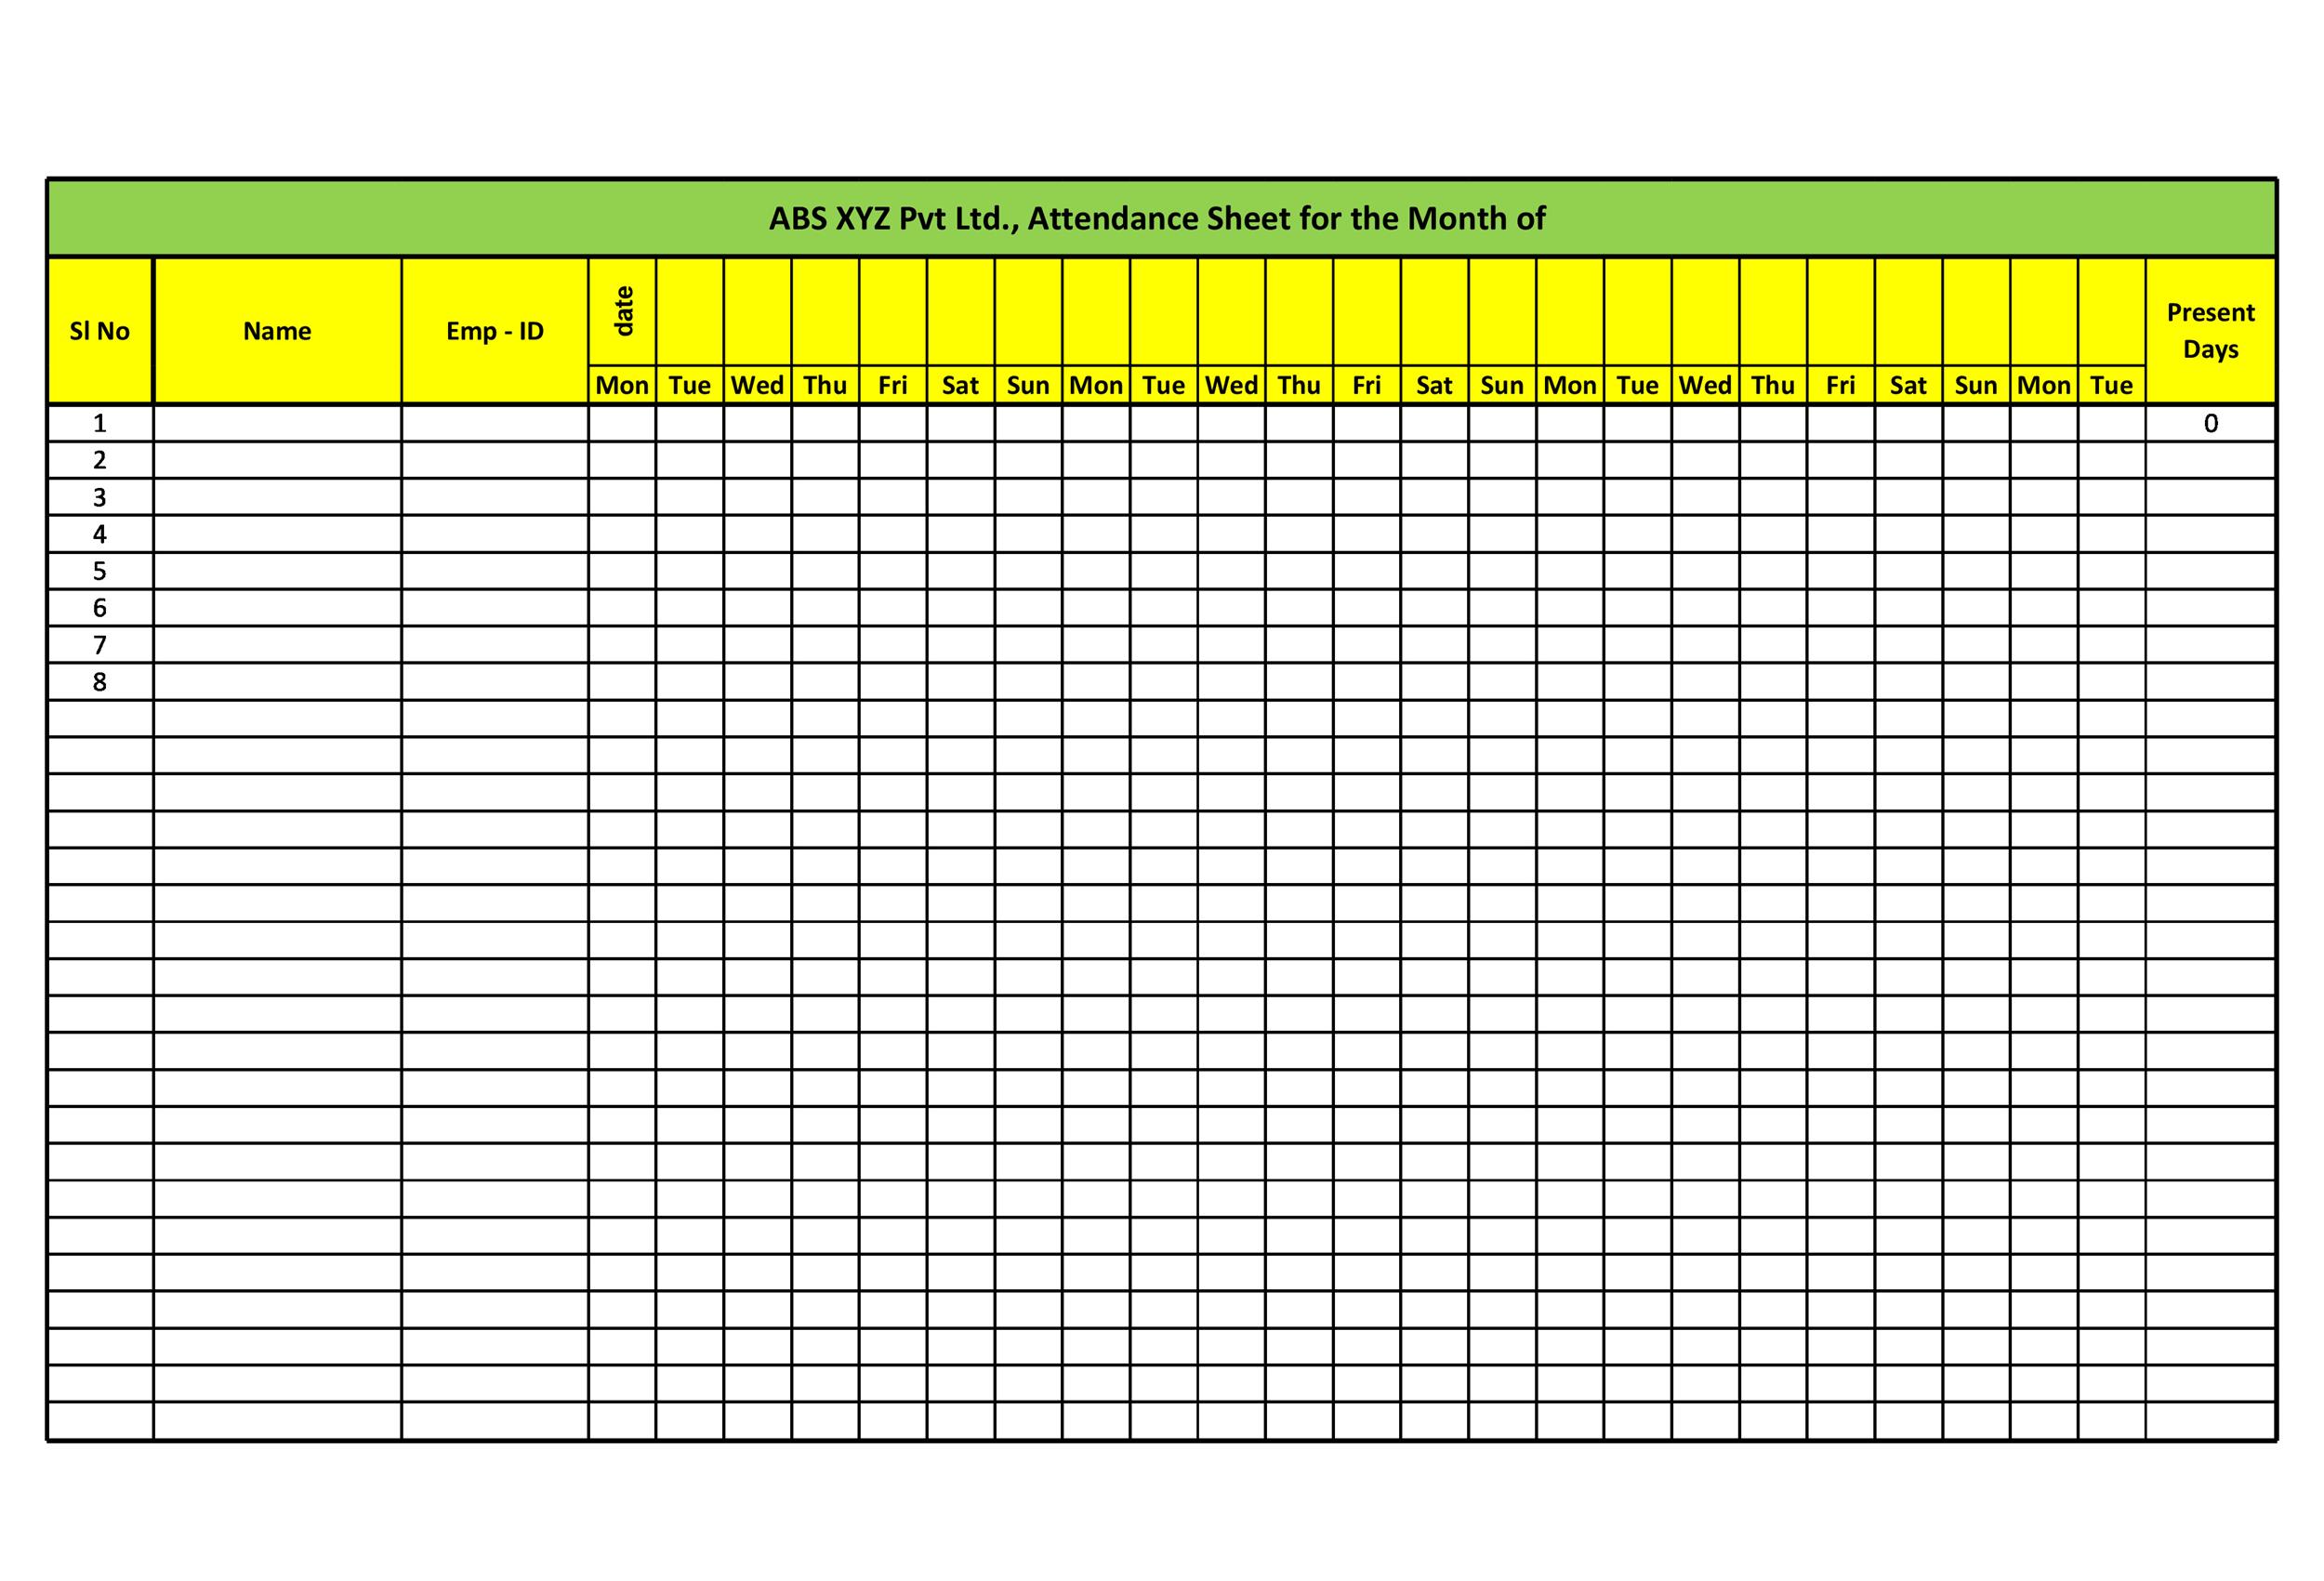 attendance-sheet-template-excel-for-students-honpharma